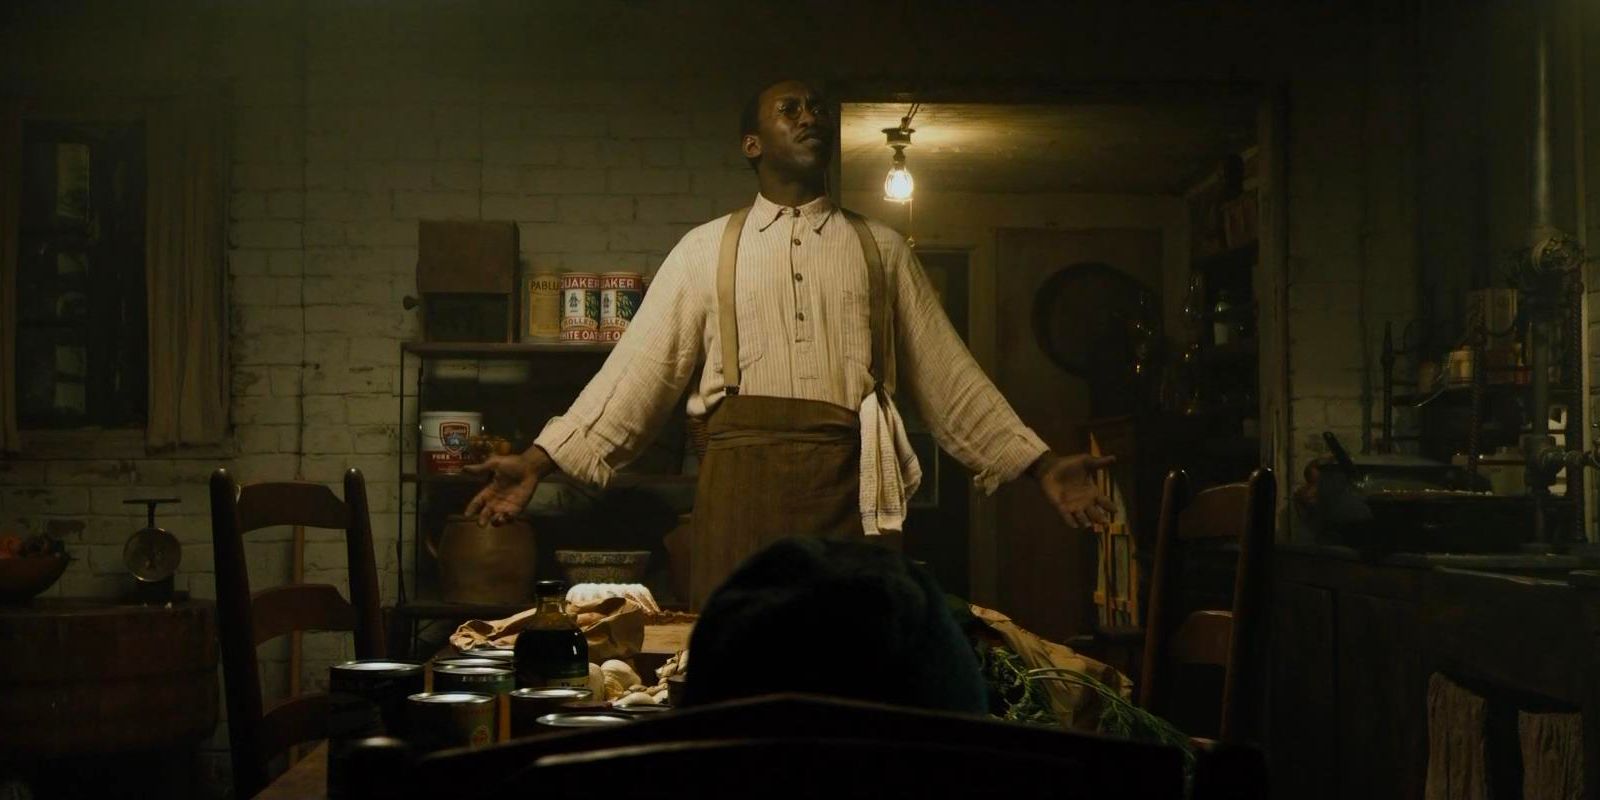 Tizzy Weathers (Mahershala Ali) stands up with his arms out wide in 'The Curious Case of Benjamin Button'.